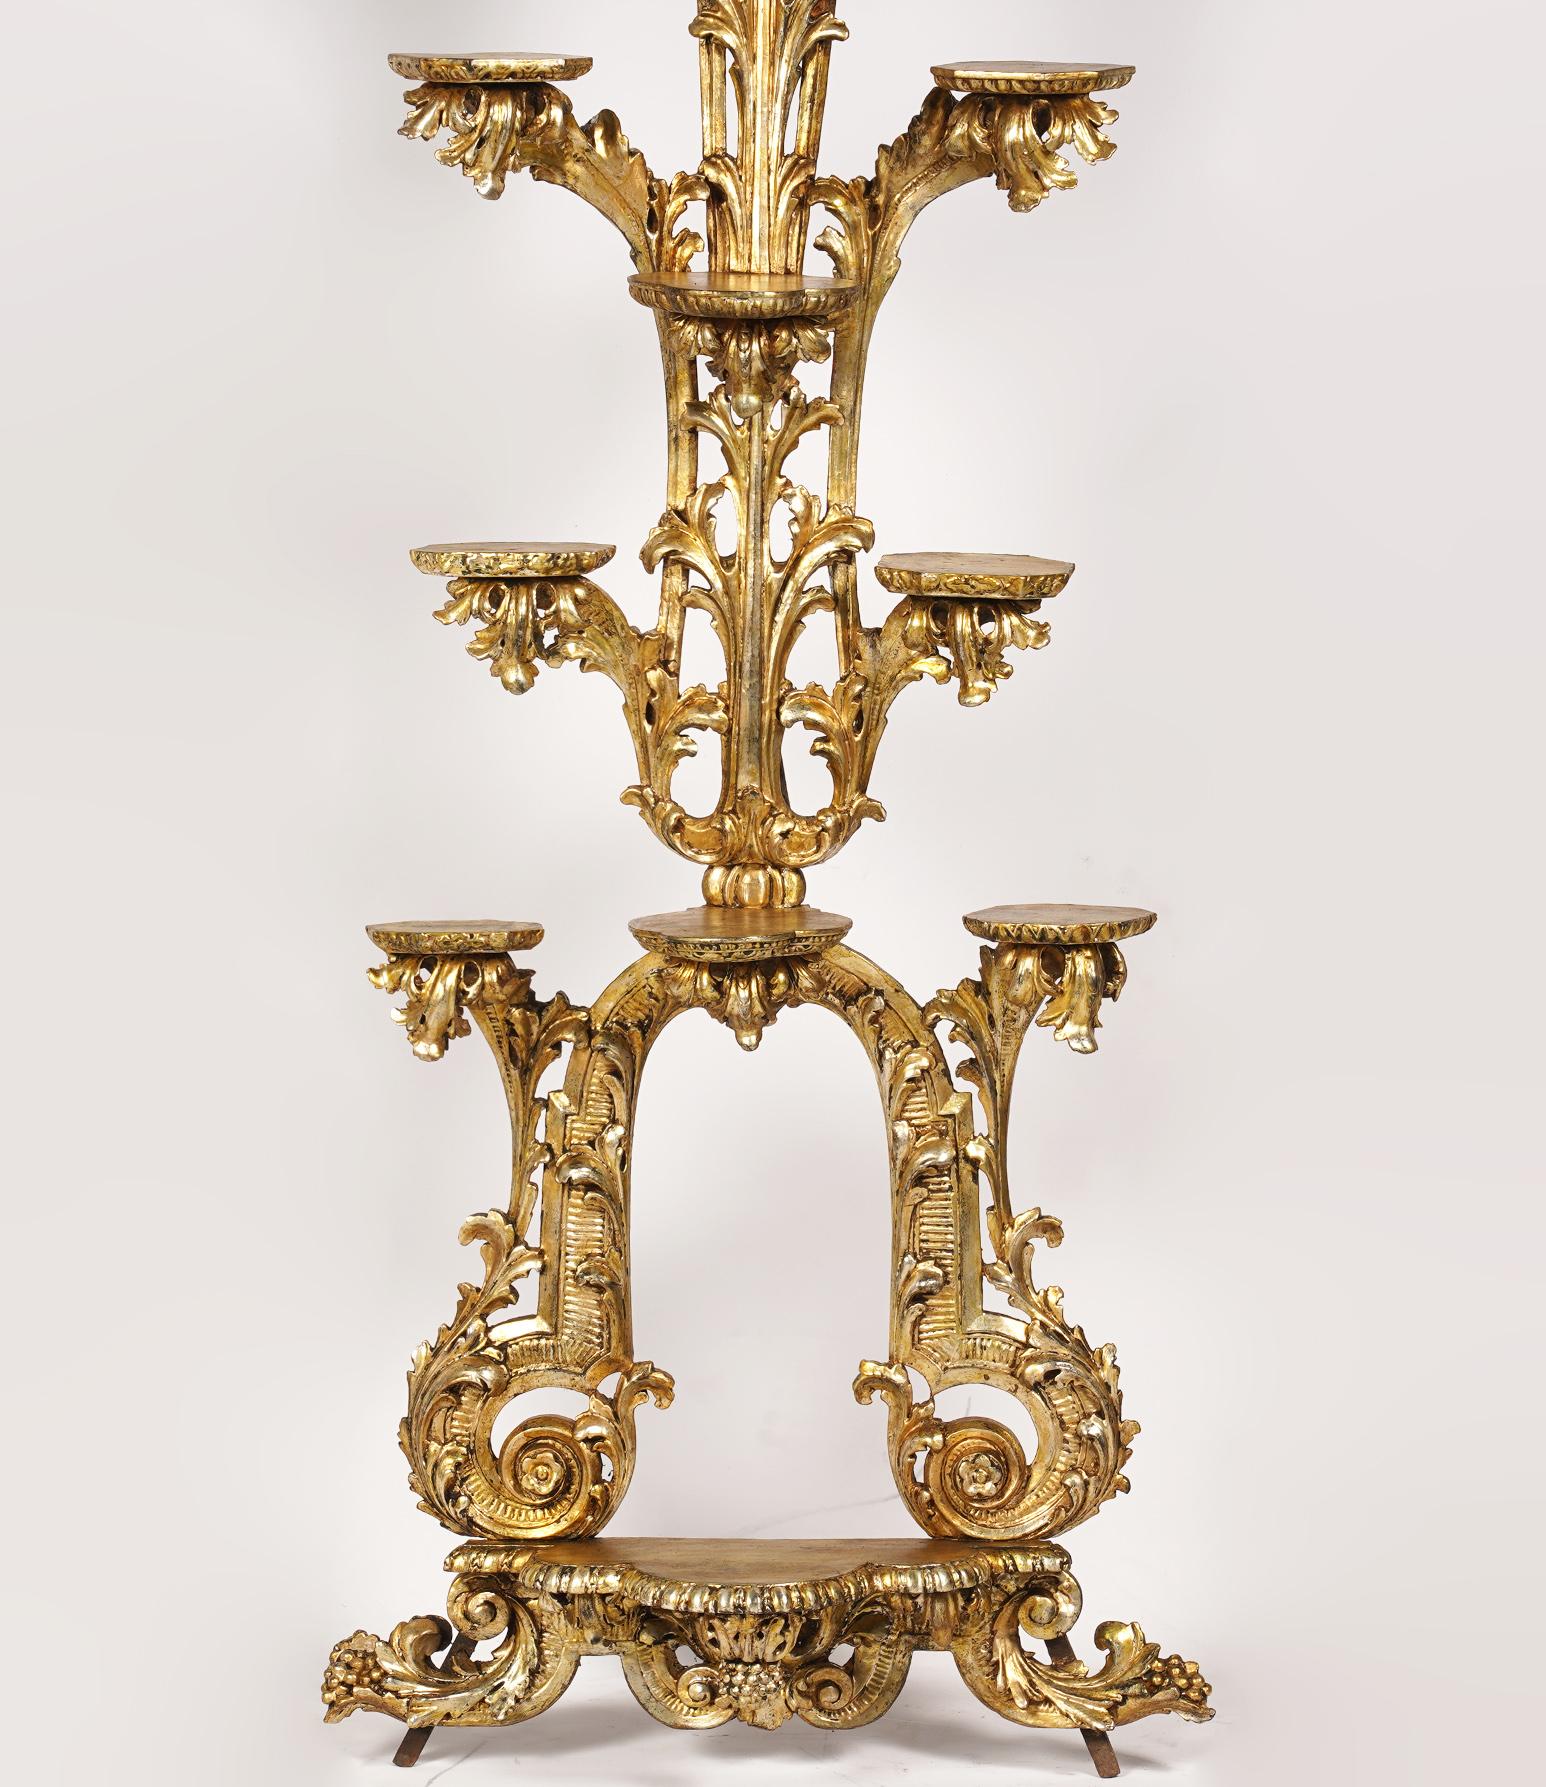 87 inches tall this unusual Italian carved giltwood towering display shelf offers 12 small dedicated circular platforms for showcasing precious items, early 19th century. Shaped by foliate carving the shelf stretches four levels upwards like a tree